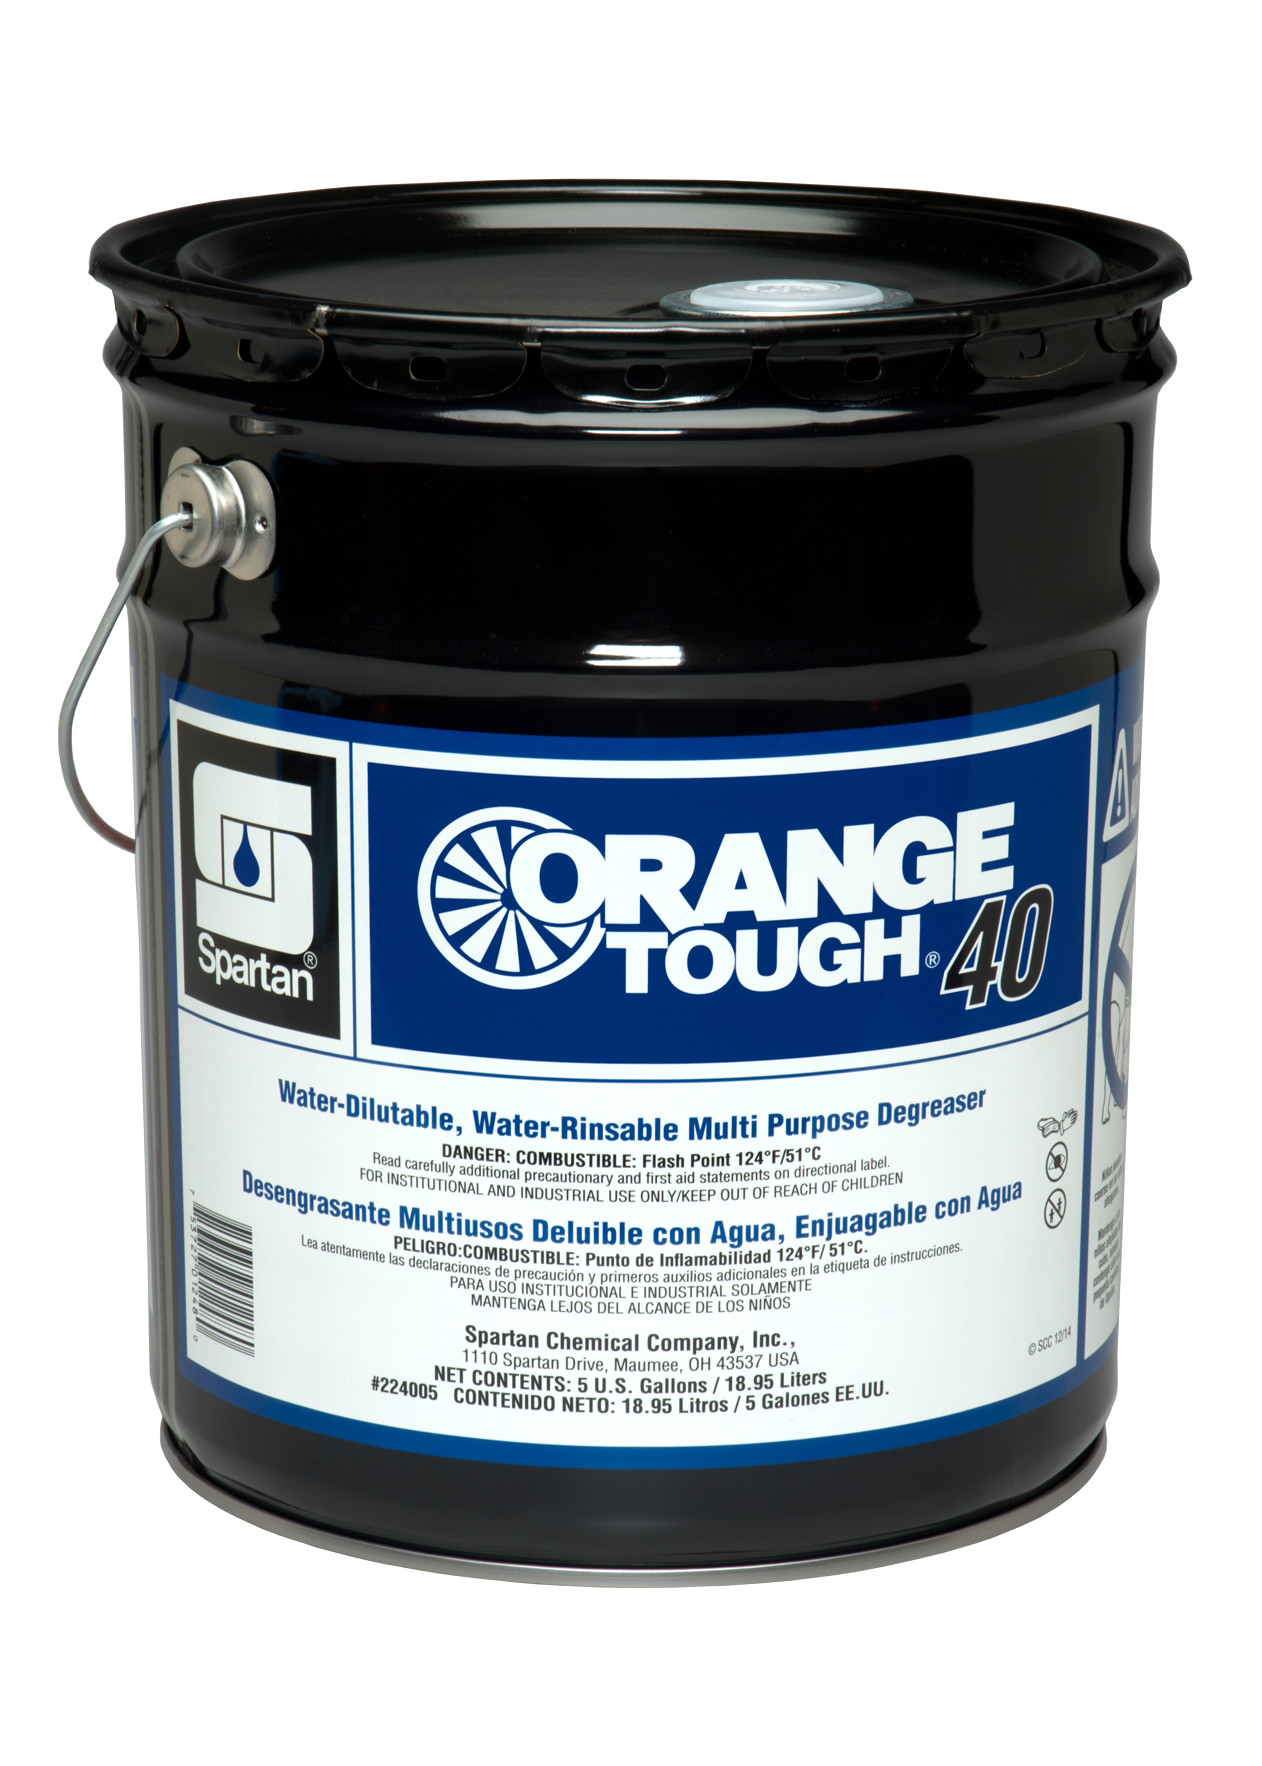 Spartan Chemical Company Orange Tough 40, 5 GAL STEEL LINED